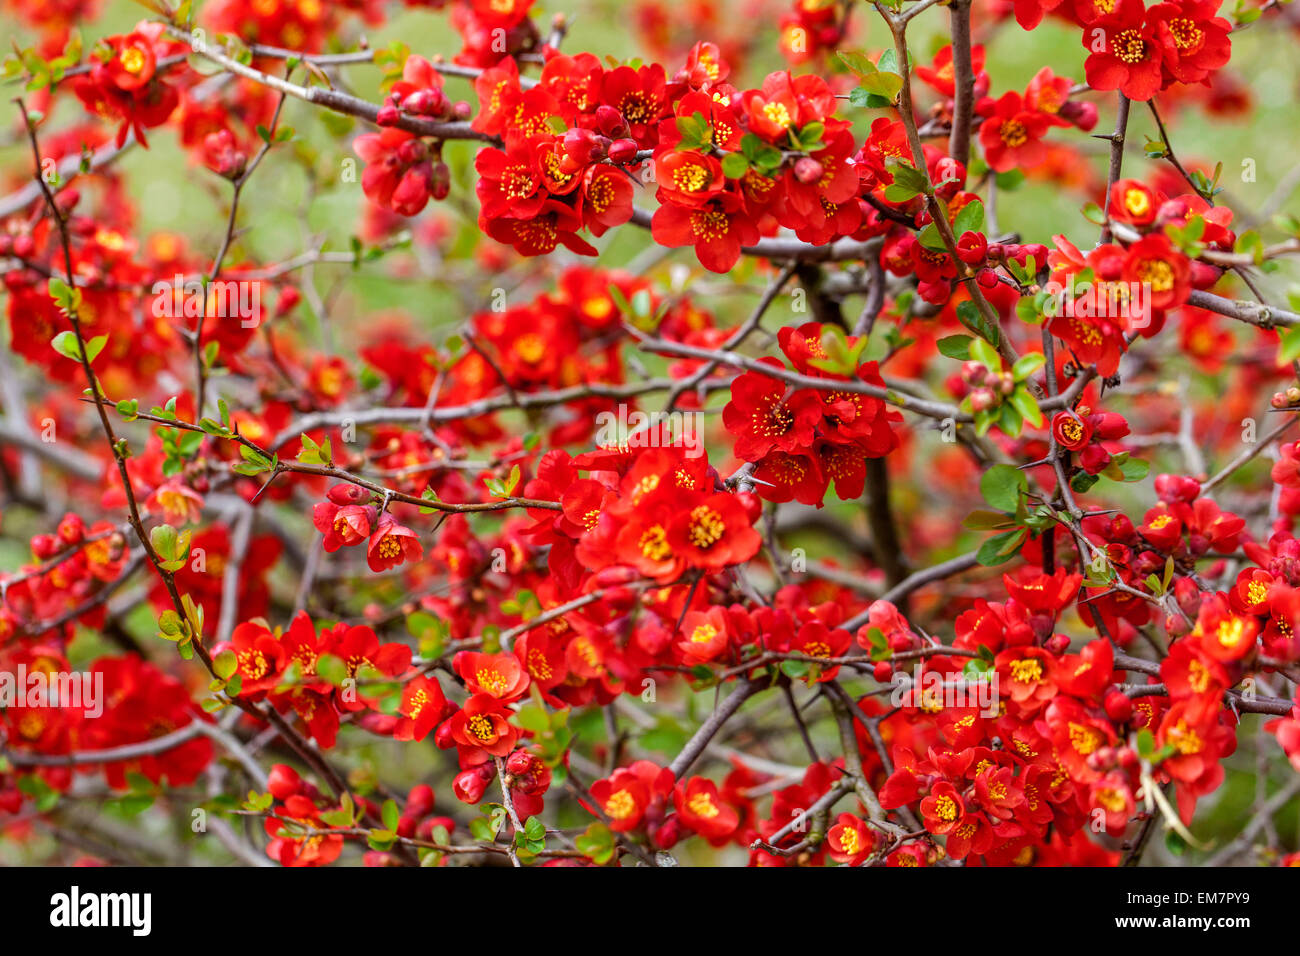 Spring flowering shrub Red Chaenomeles x superba 'Nicoline' Japanese Quince flowers Chaenomeles 'Nicoline' blossoms on branches Stock Photo